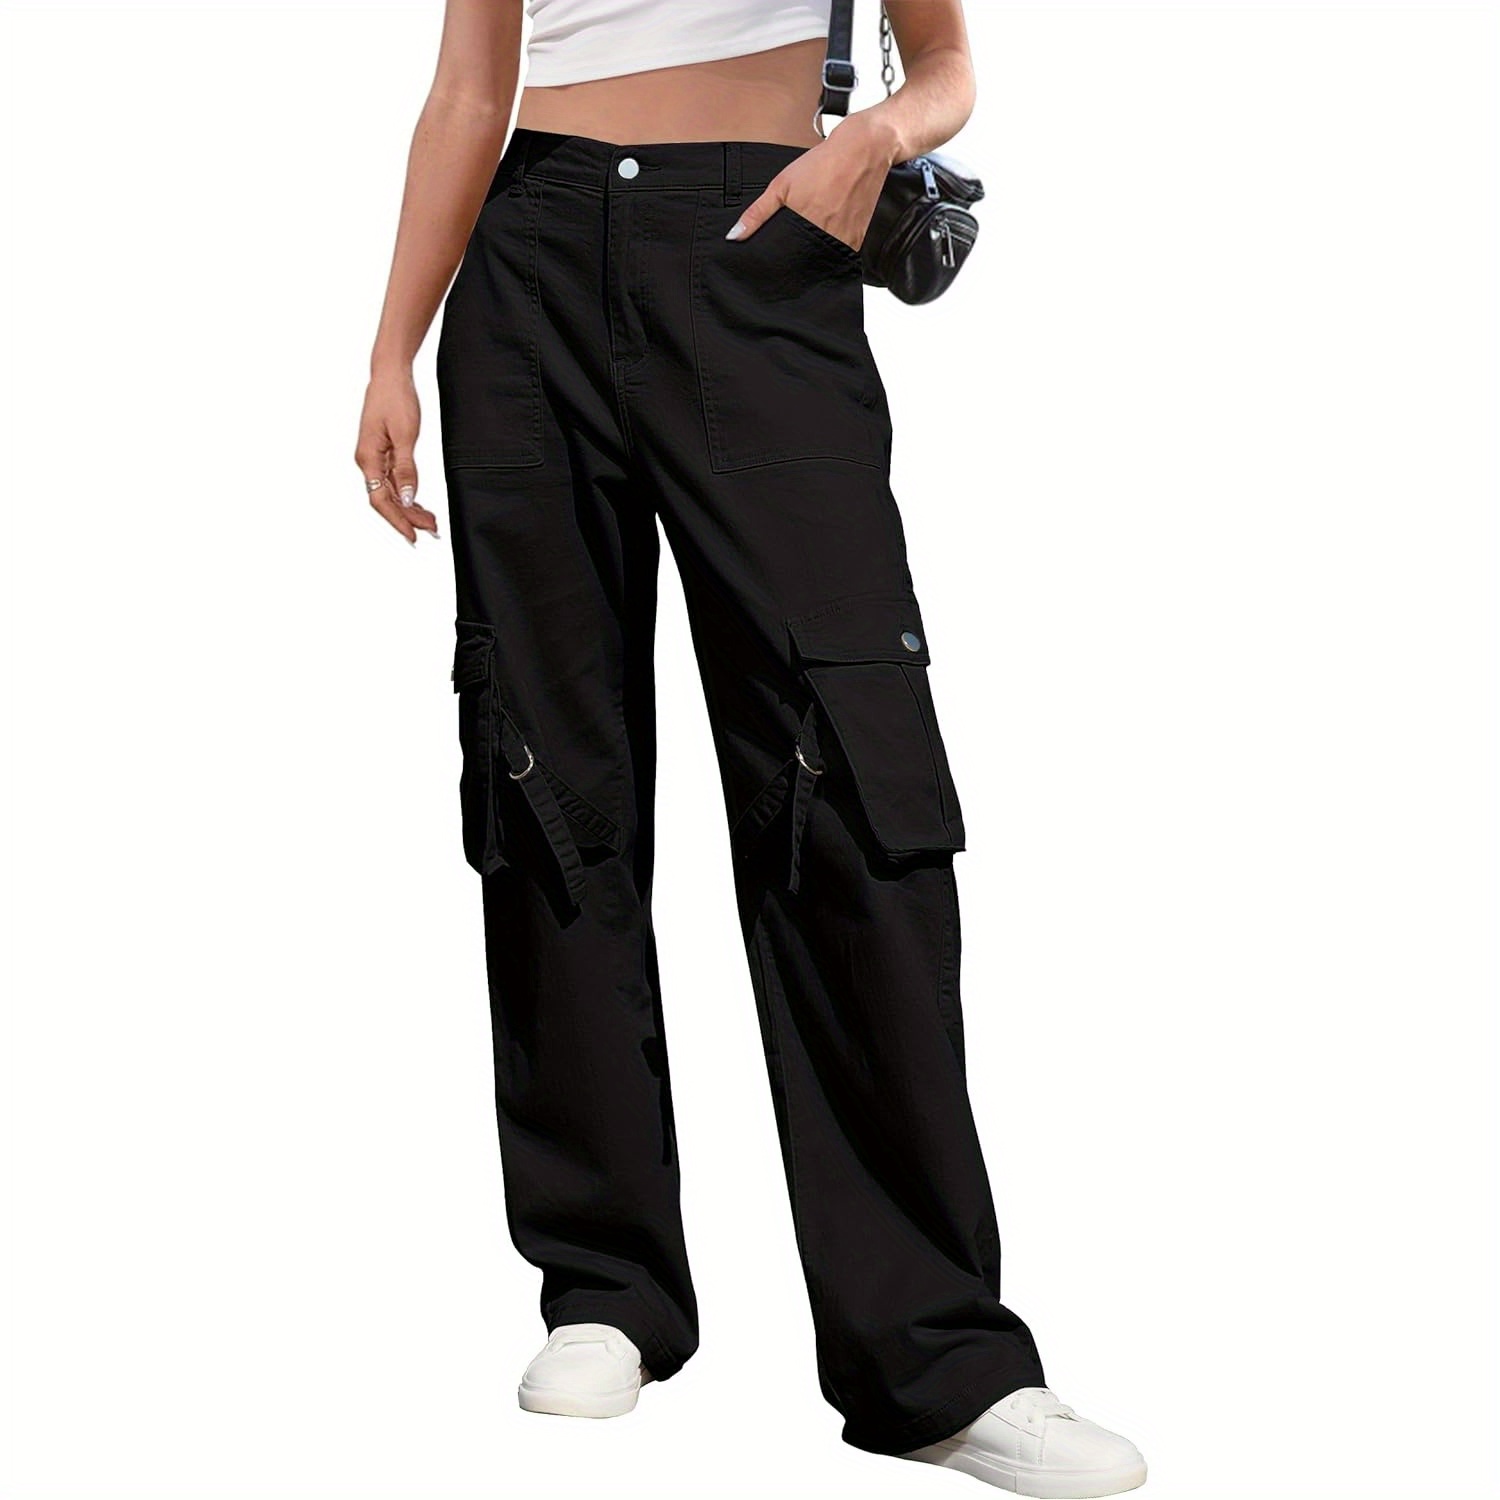 

Womens Pants Wide Leg Cargo Pants Women High Waisted Pants With 6 Pockets Stretchy Y2k Streetwear Casual Trousers